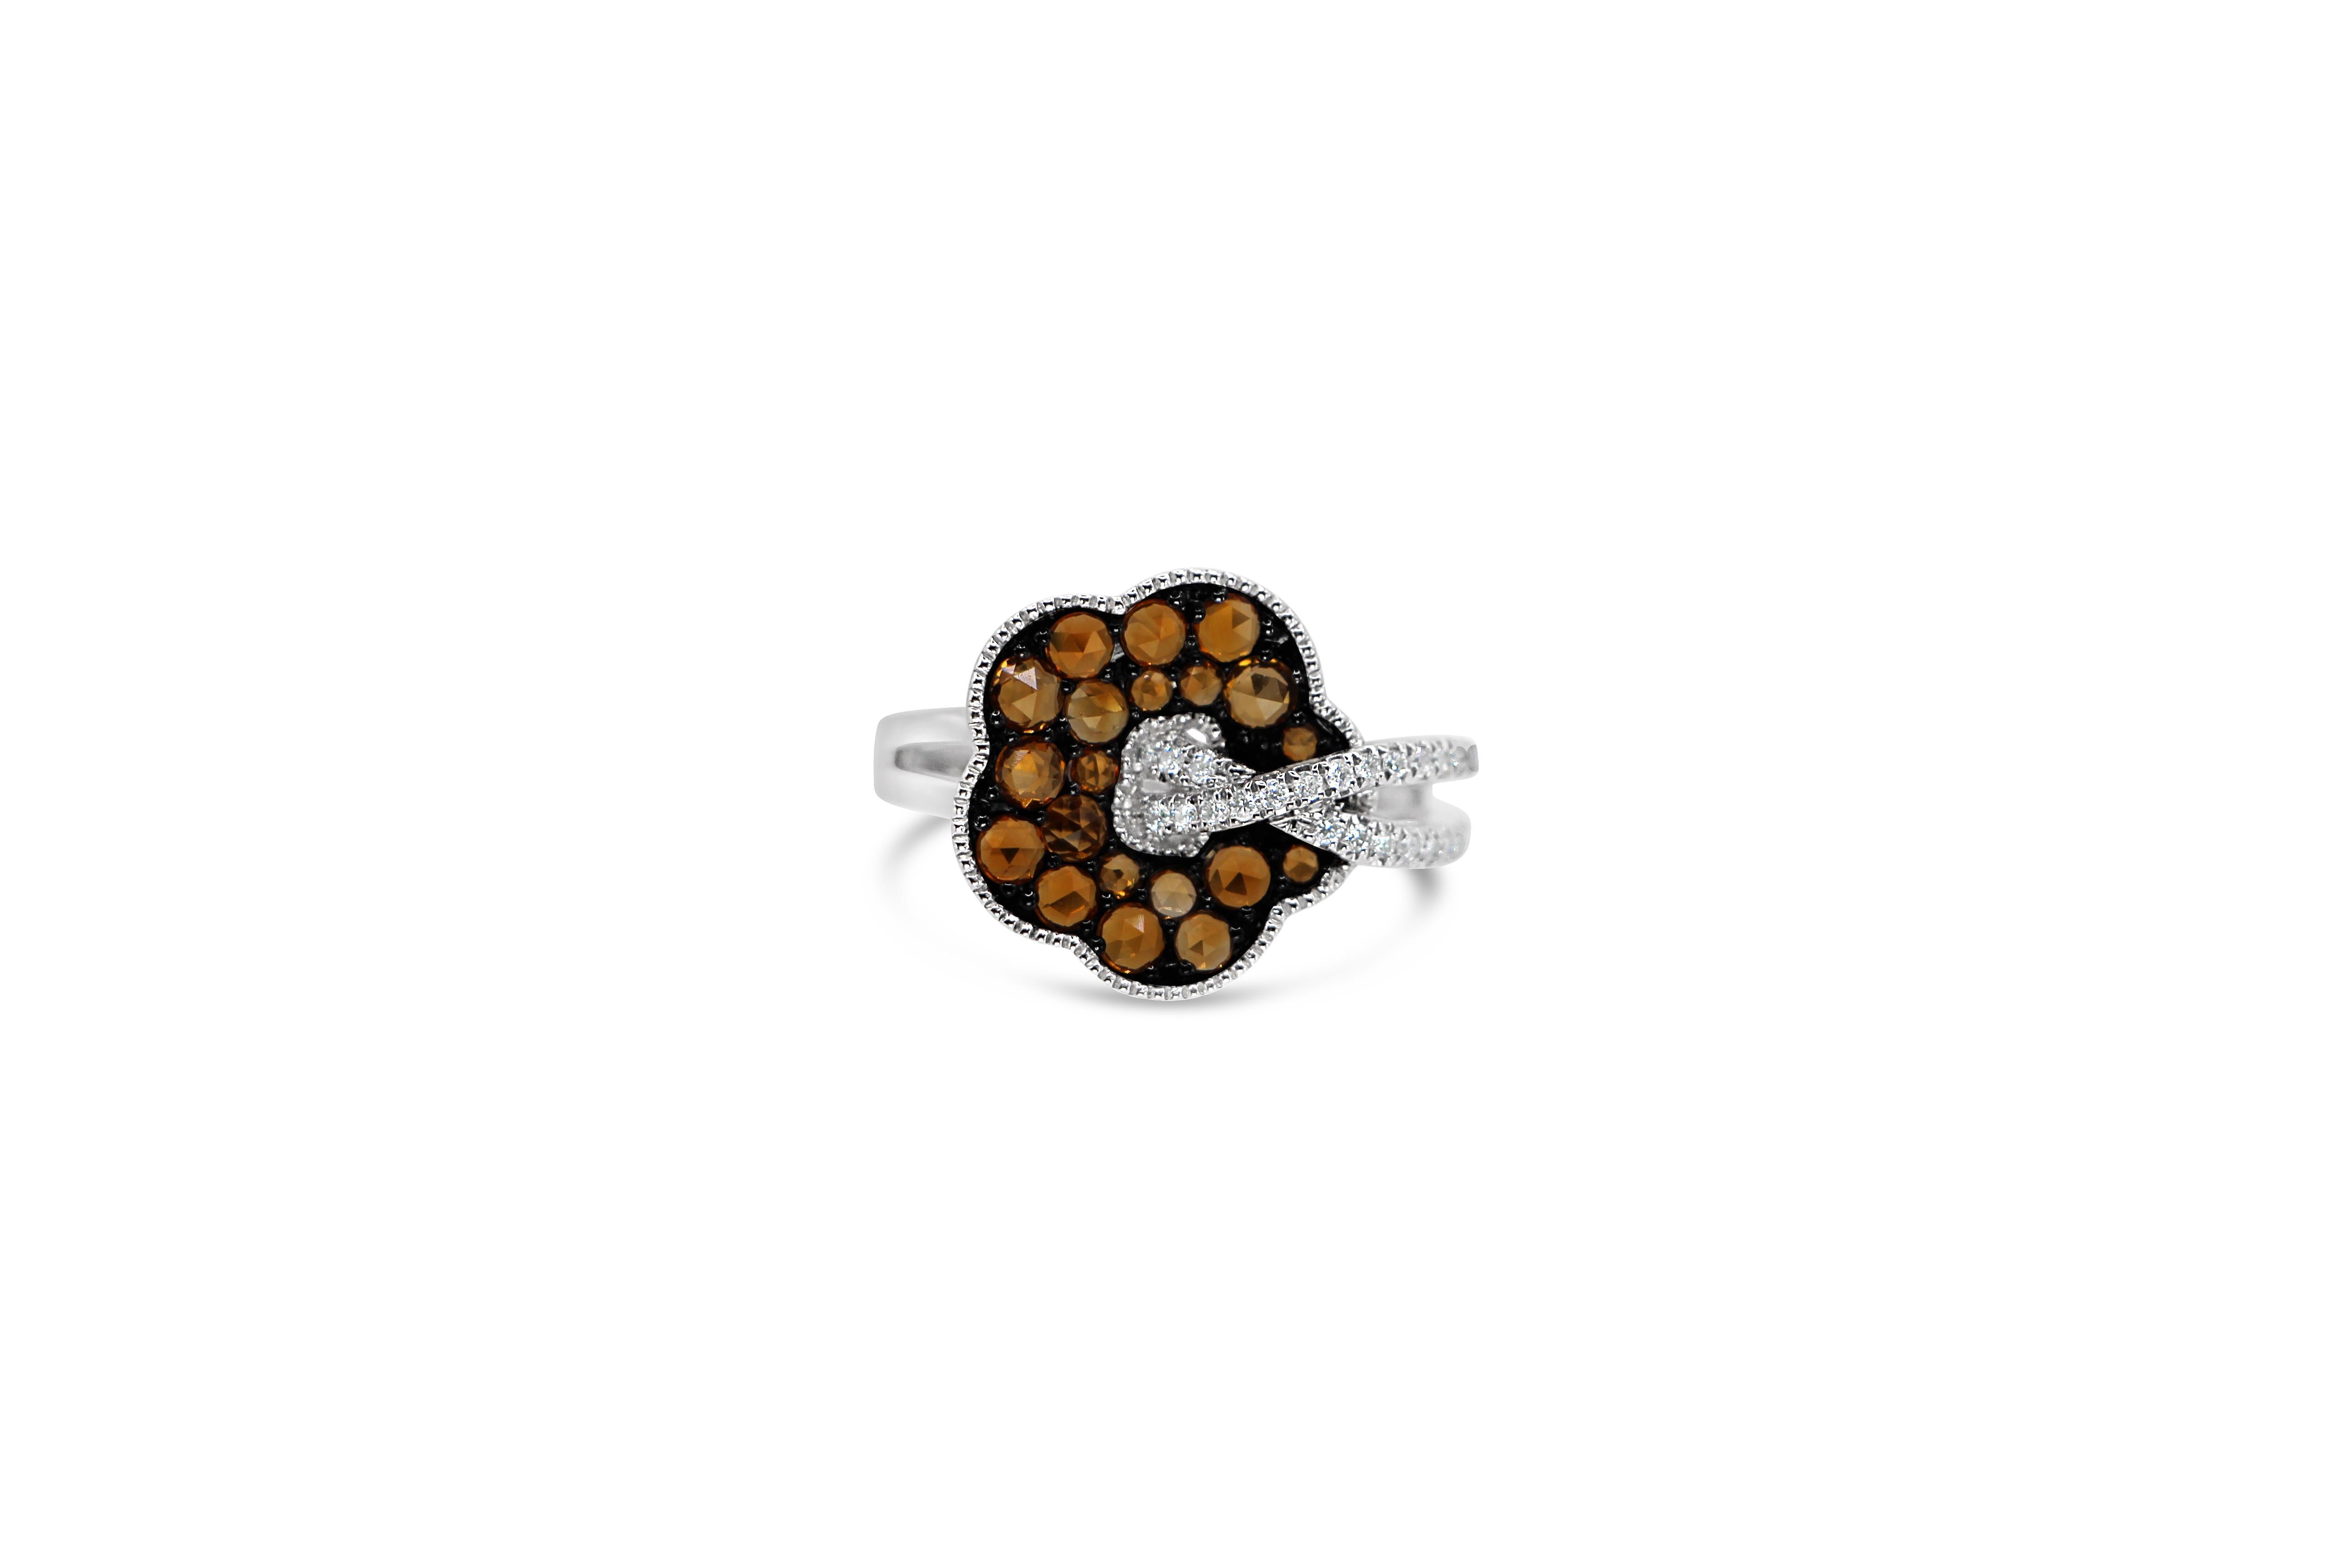 Bloom Flower Ring, in 18Kt White Gold, with Double Pave Shank. This floral ring is decorated with Brown old cut diamonds snow pave setting and White brilliant cut 
The brown diamonds are 0.95 ct and the white diamonds are 0.16 ct all set in pave